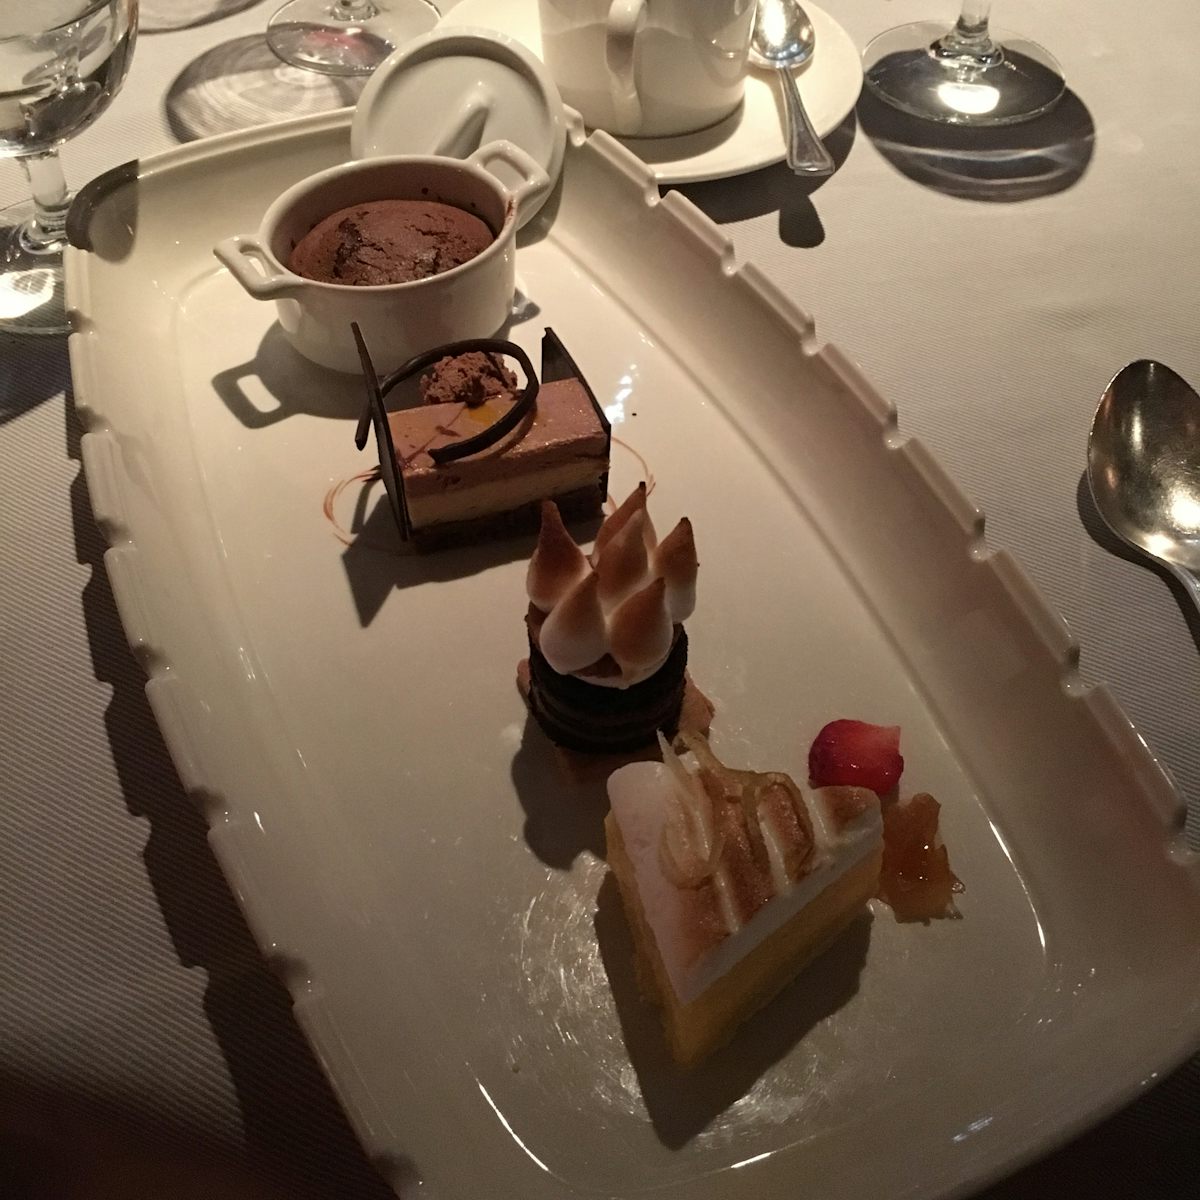 The crown dependence - sampler dessert from Crown Grill!